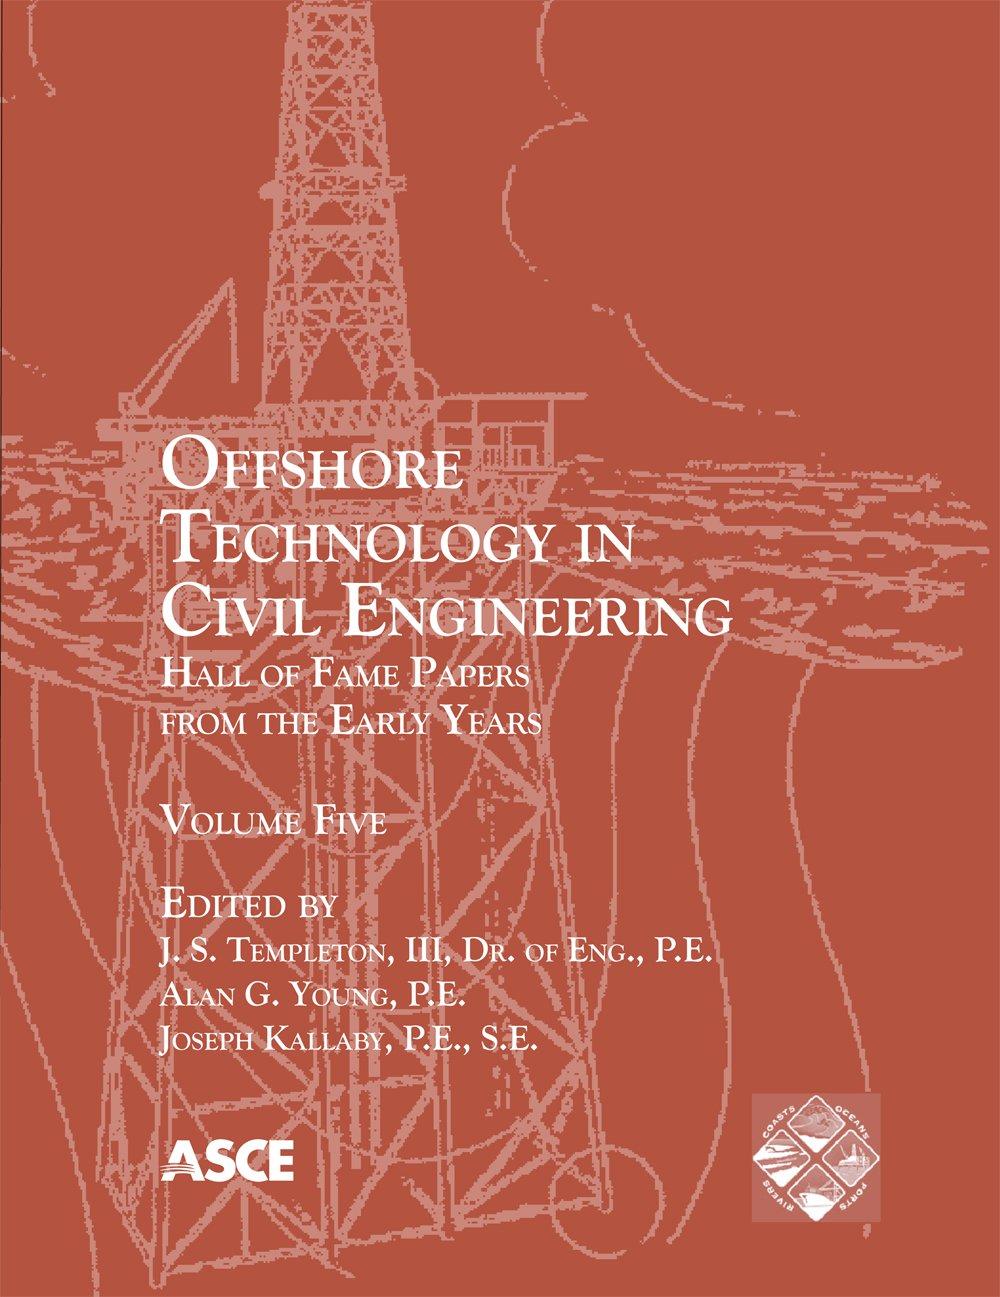 offshore technology in civil engineering hall of fame papers from the early years vol. 5 1st edition and